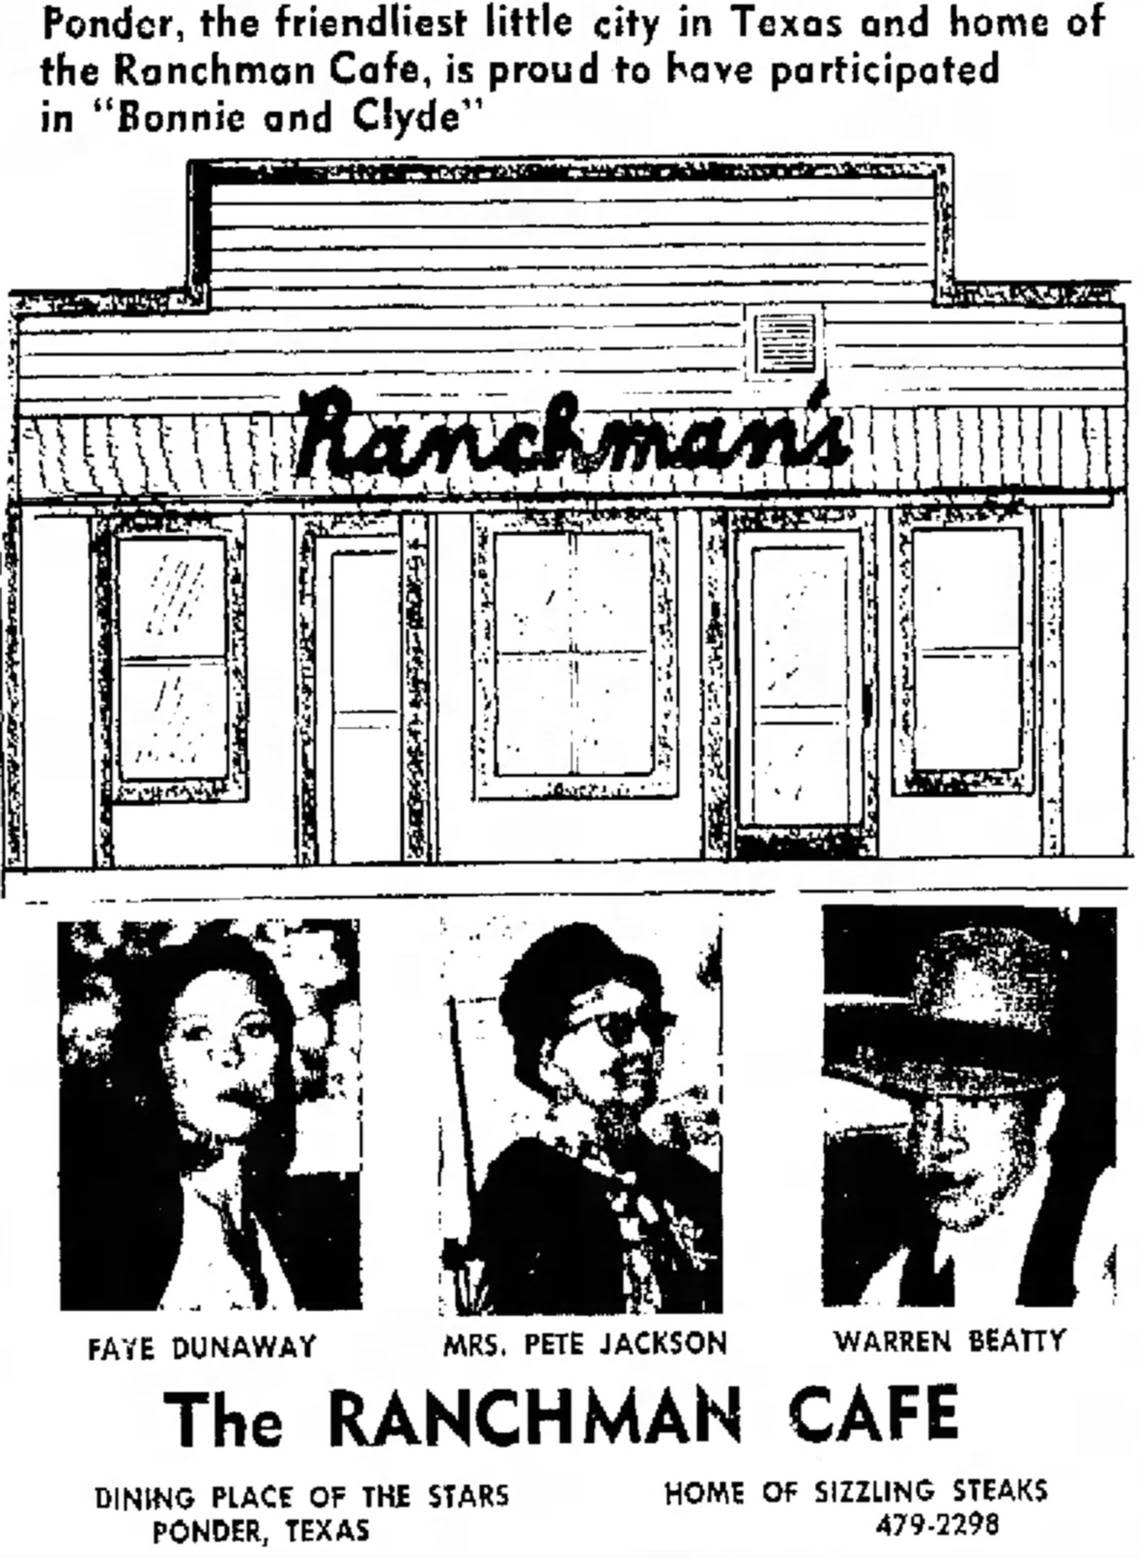 Ranchman’s Cafe owner Grace “Pete” Jackson paid tribute to actors Warren Beatty and Faye Dunaway in 1966 after the filming of “Bonnie and Clyde.”